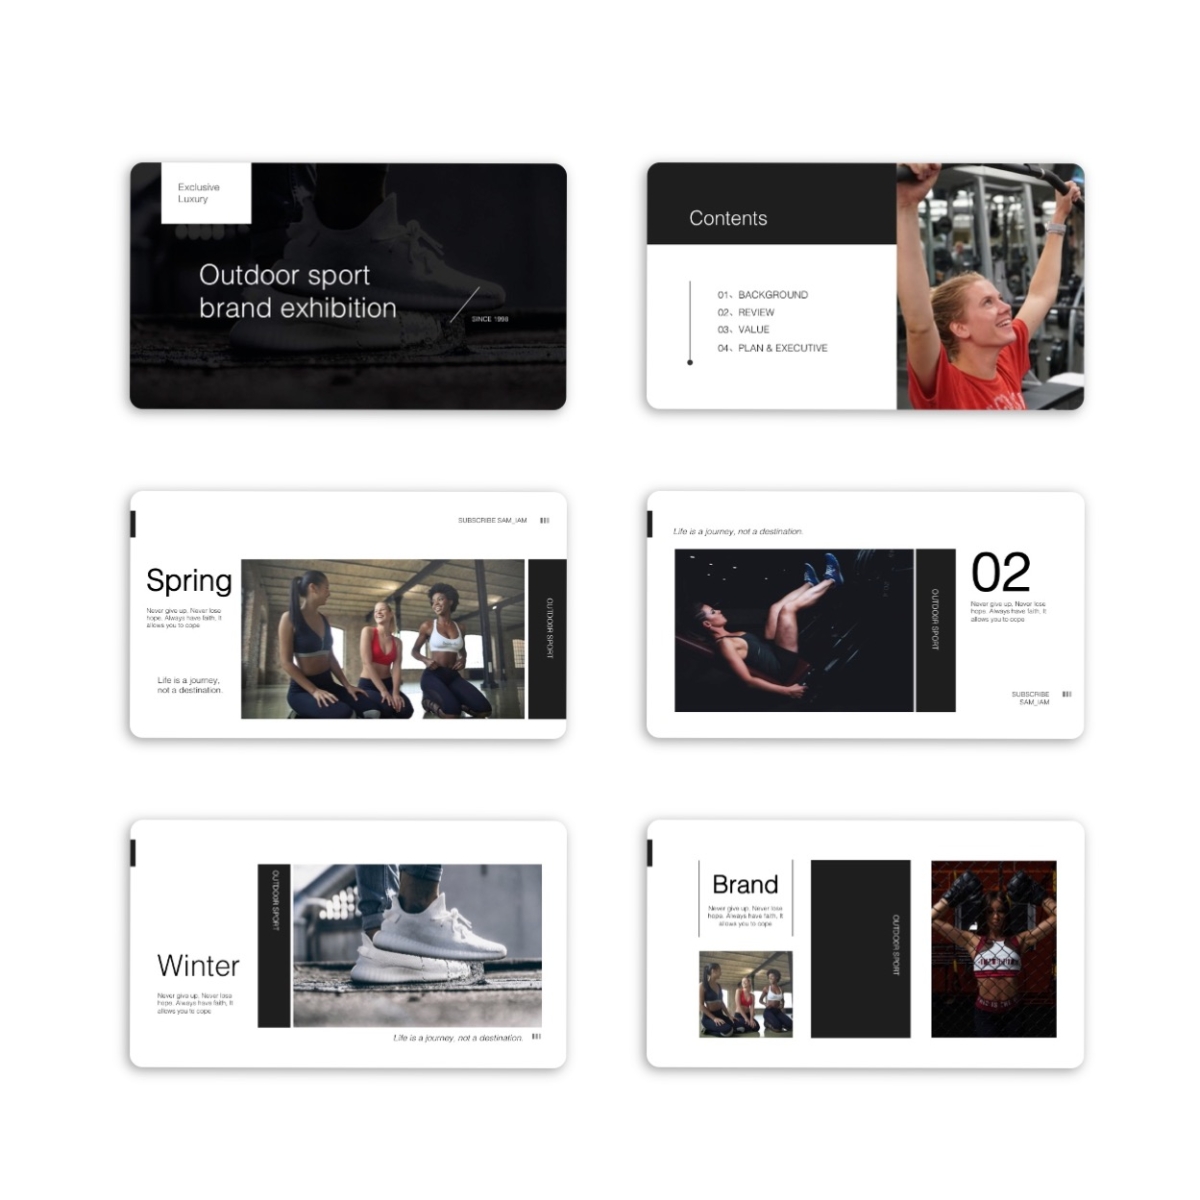 Exclusive Luxury Fashion Powerpoint Template